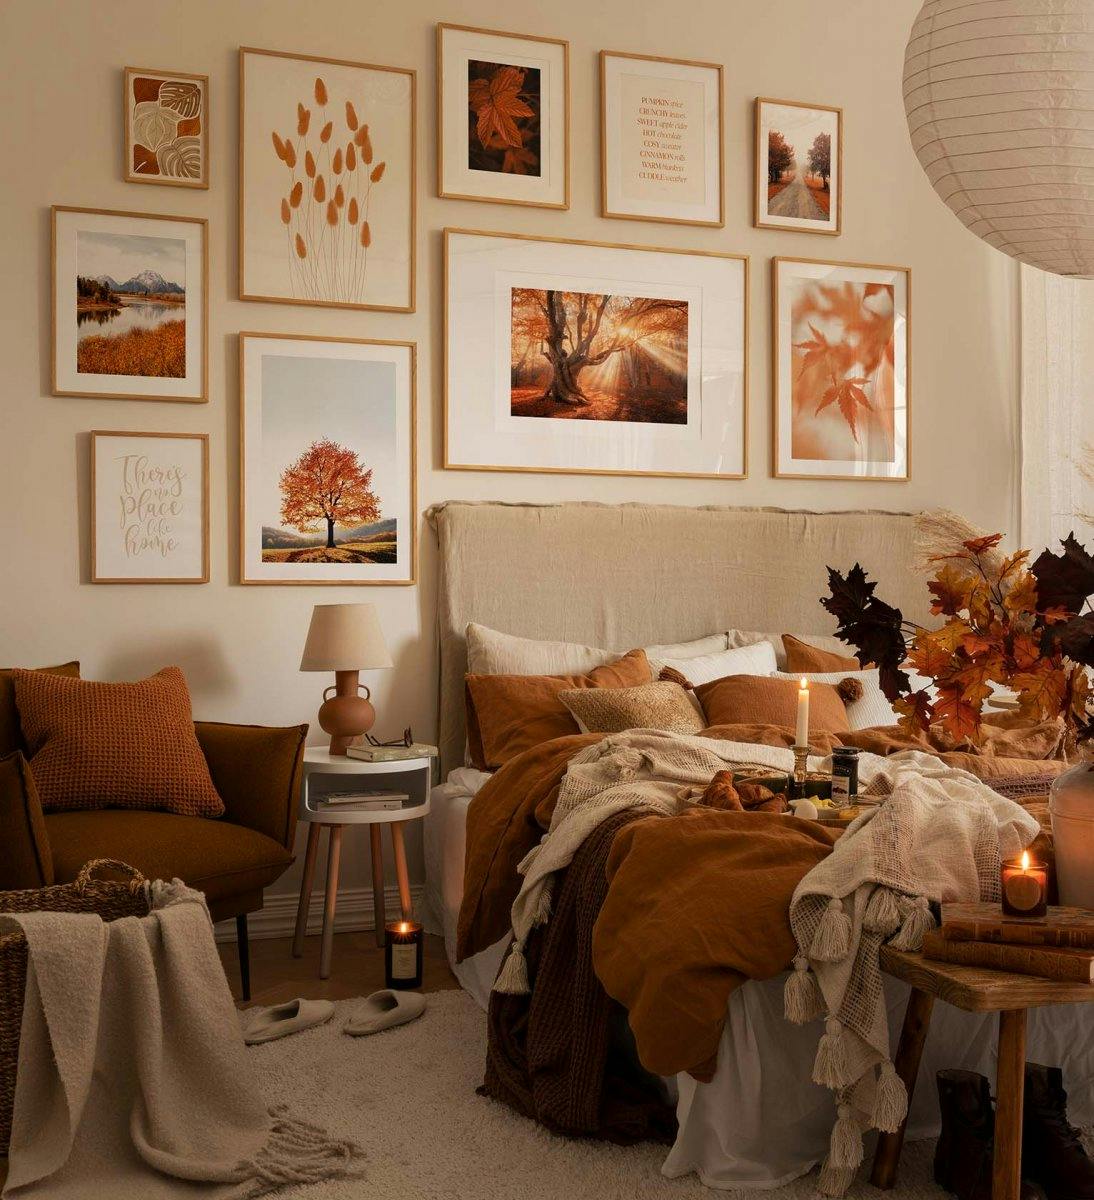 Gallery wall with inspiration from the autumn with prints and photographs in orange and oak frames for bedroom